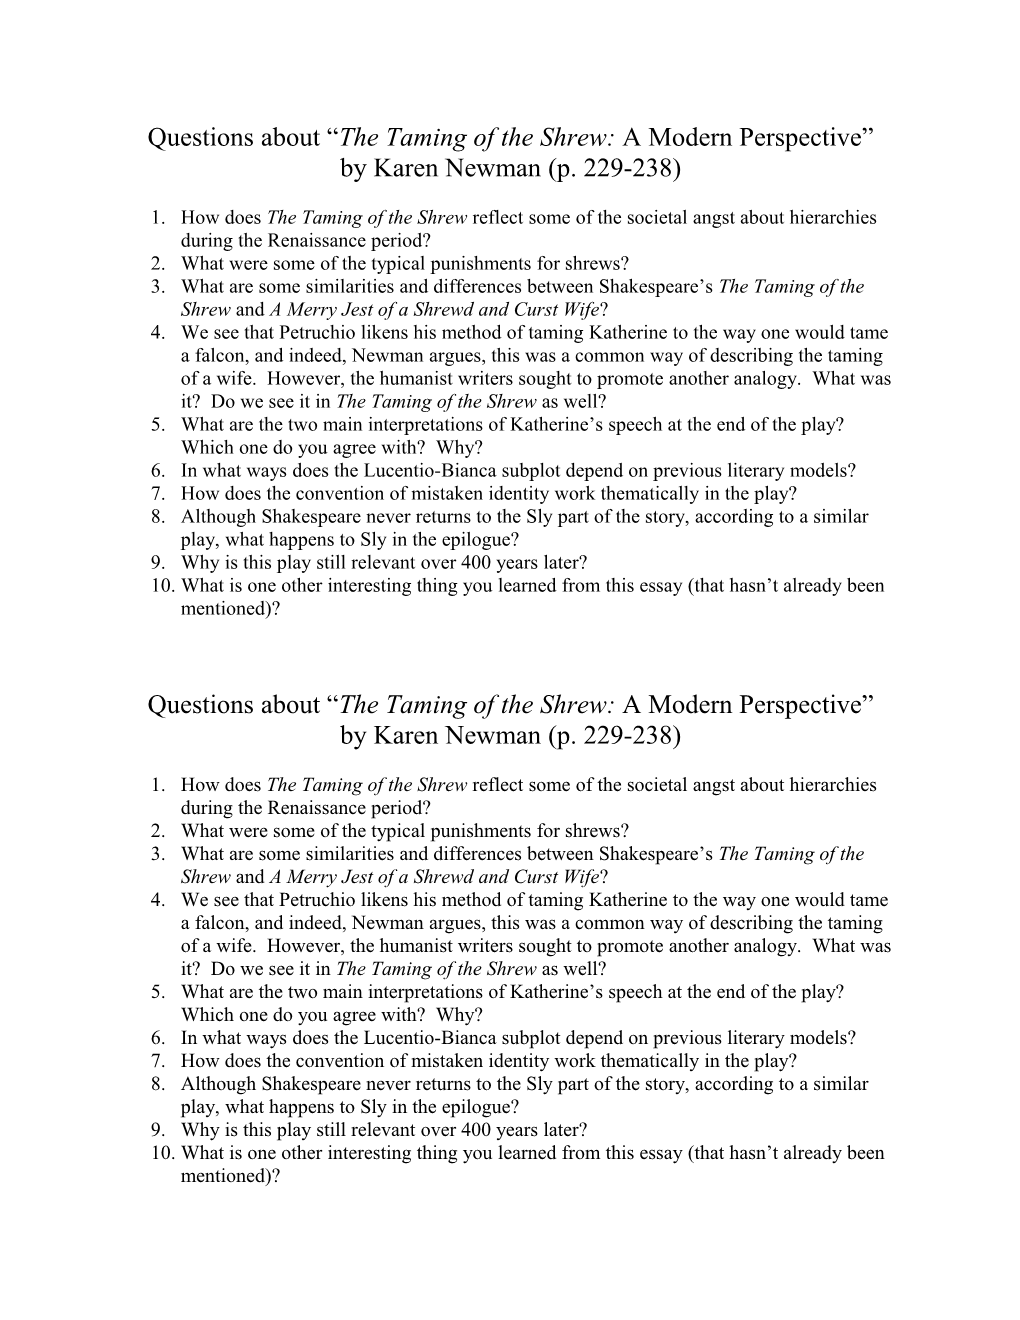 Questions About the Taming of the Shrew: a Modern Perspective by Karen Newman (P